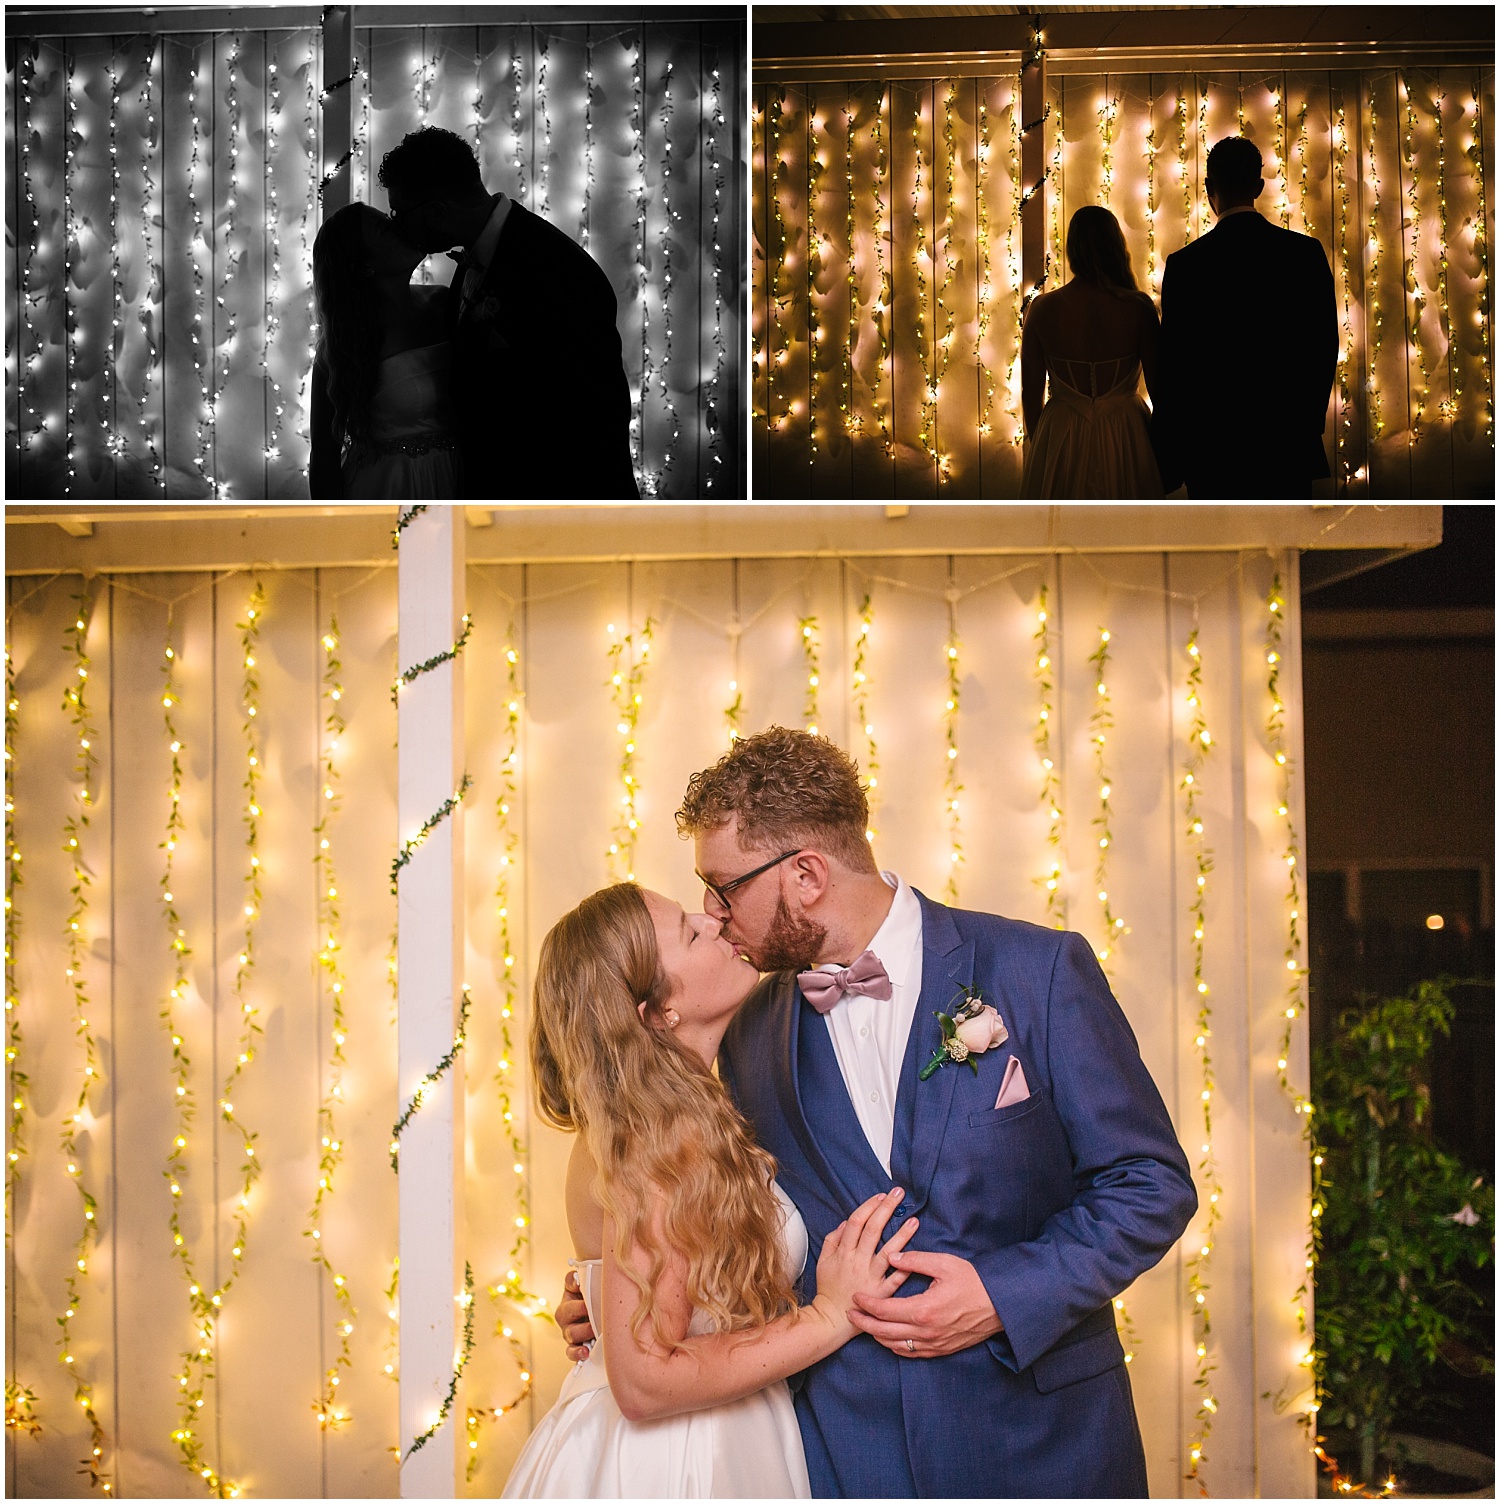 Bride and groom stand in front of twinkle lights at their intimate wedding reception